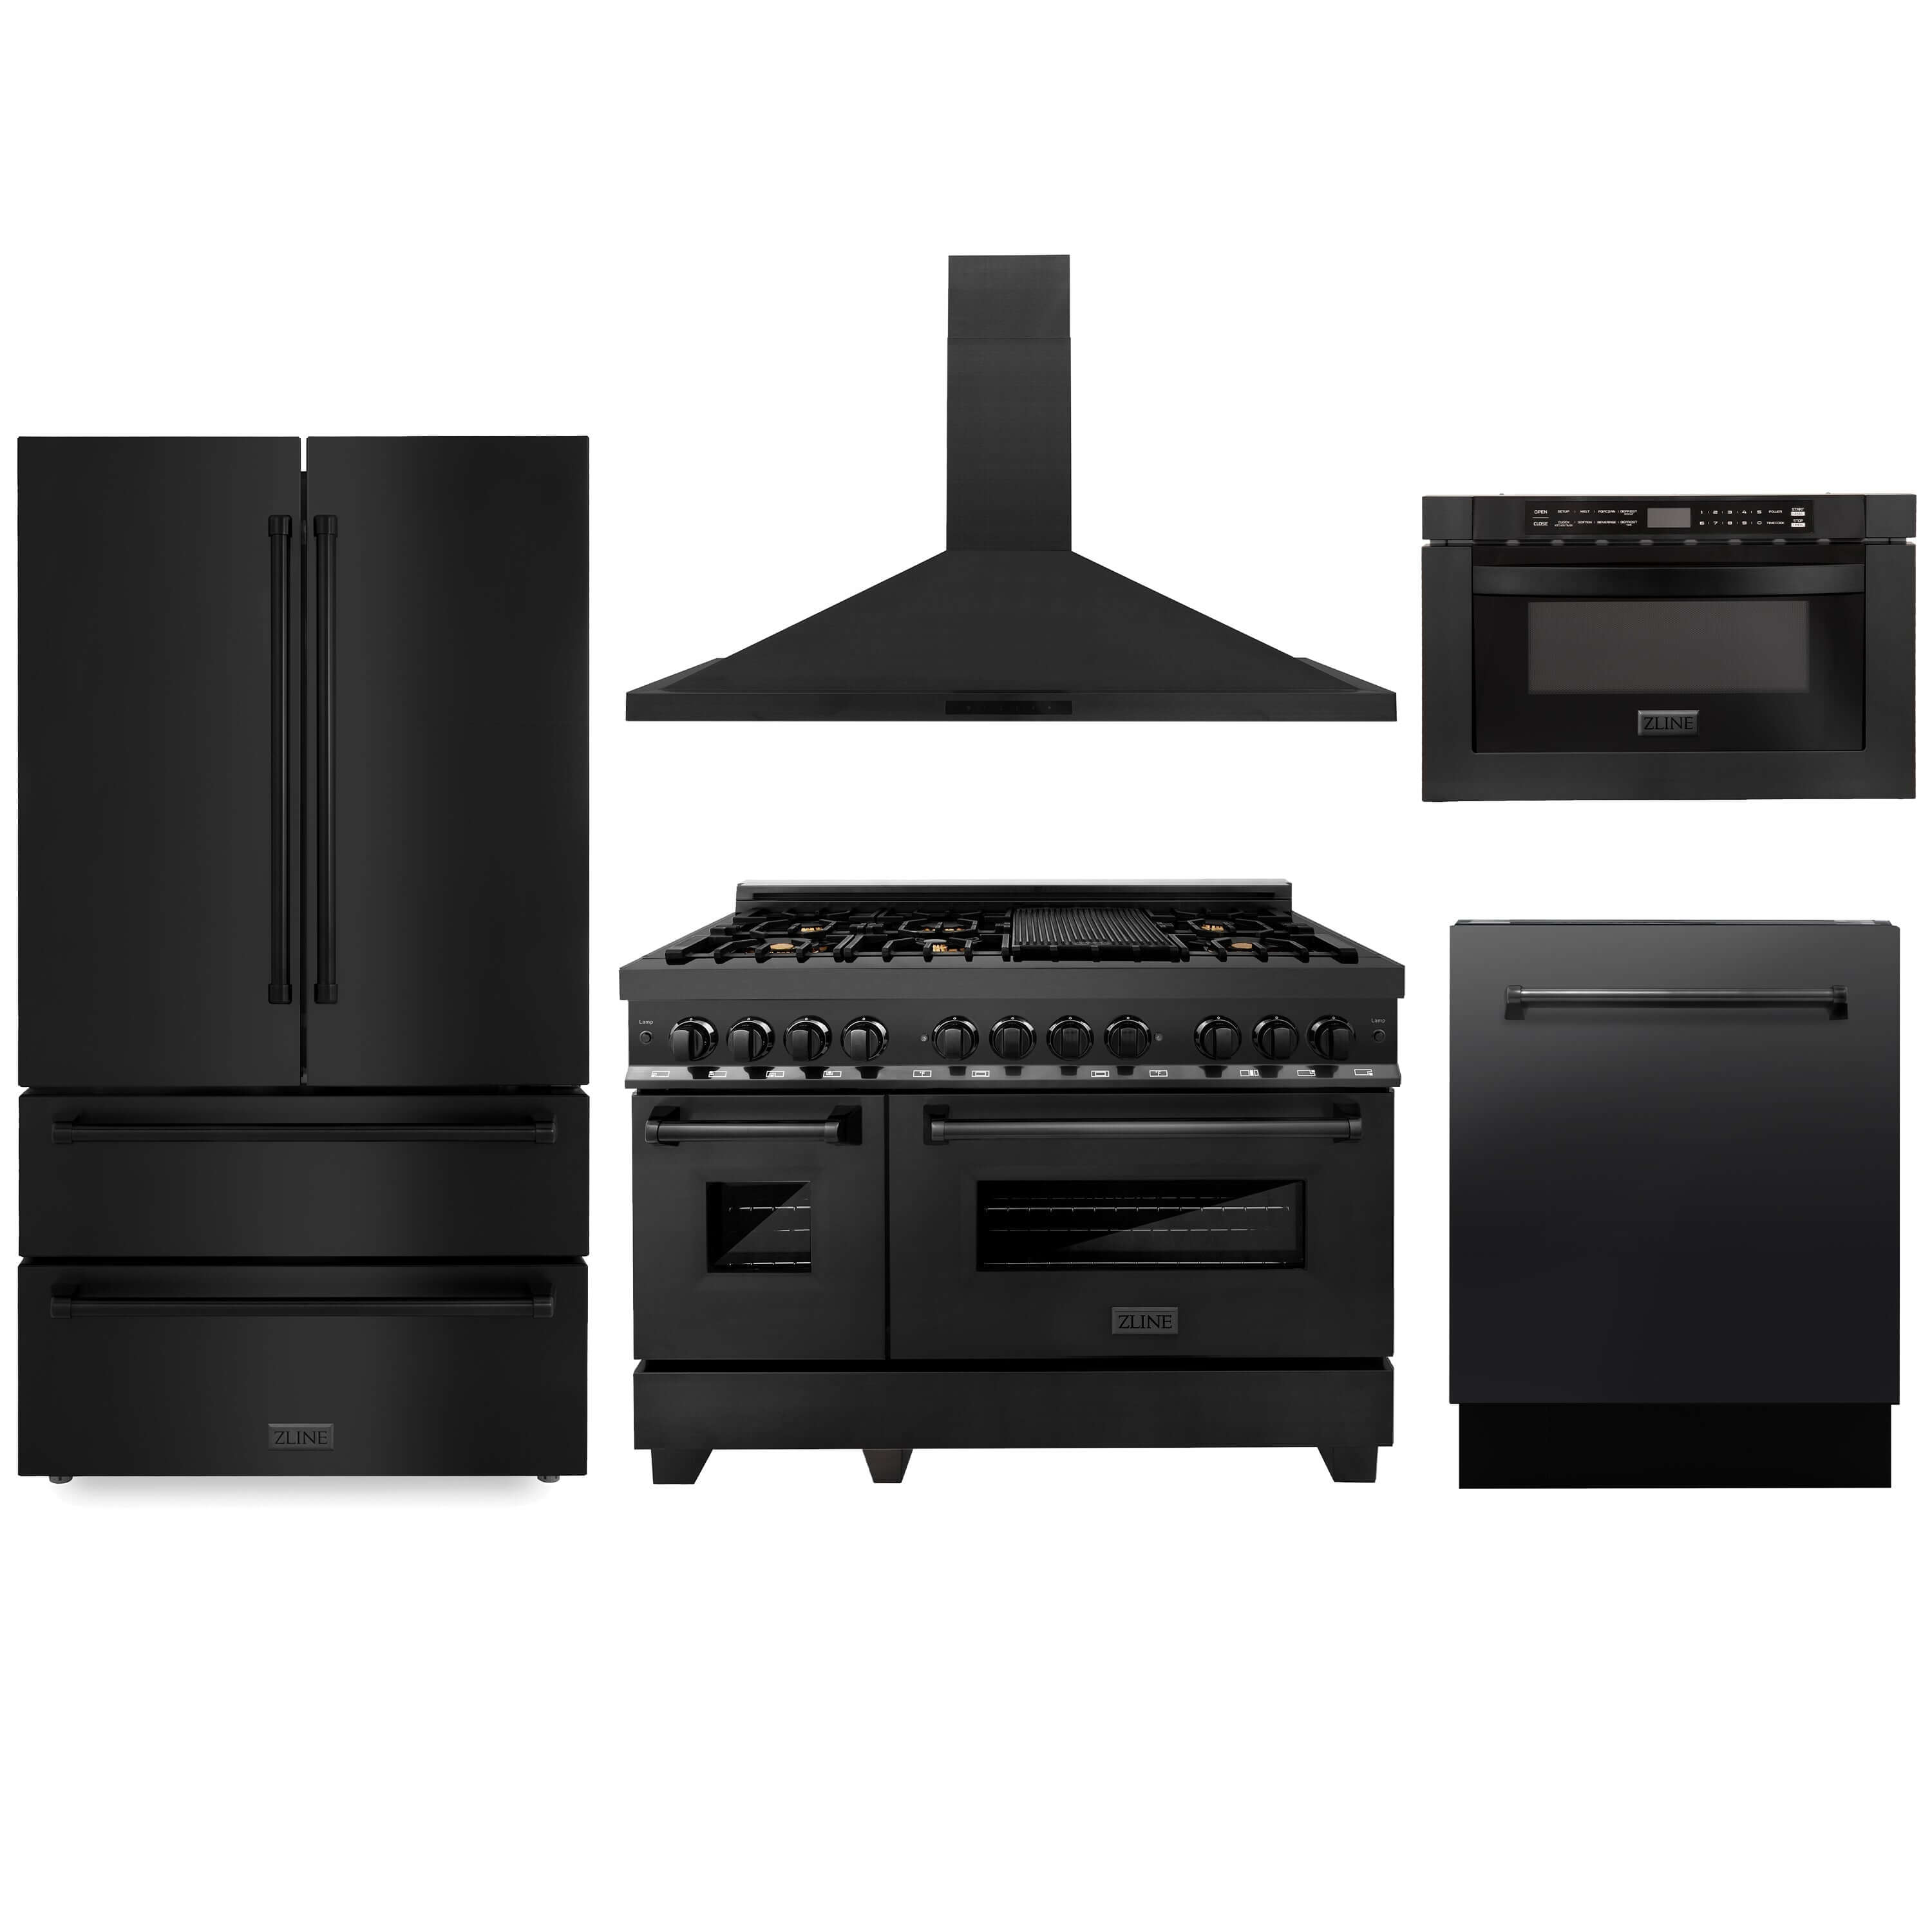 ZLINE Kitchen Package with Black Stainless Steel Refrigeration, 48 in. Dual Fuel Range in Black Stainless Steel with Brass Burners, 48 in. Black Stainless Steel Range Hood, Microwave Drawer in Black Stainless Steel, and 24 in. Tall Tub Dishwasher with Black Stainless Steel Panel (5KPR-RABRH48-MWDWV)